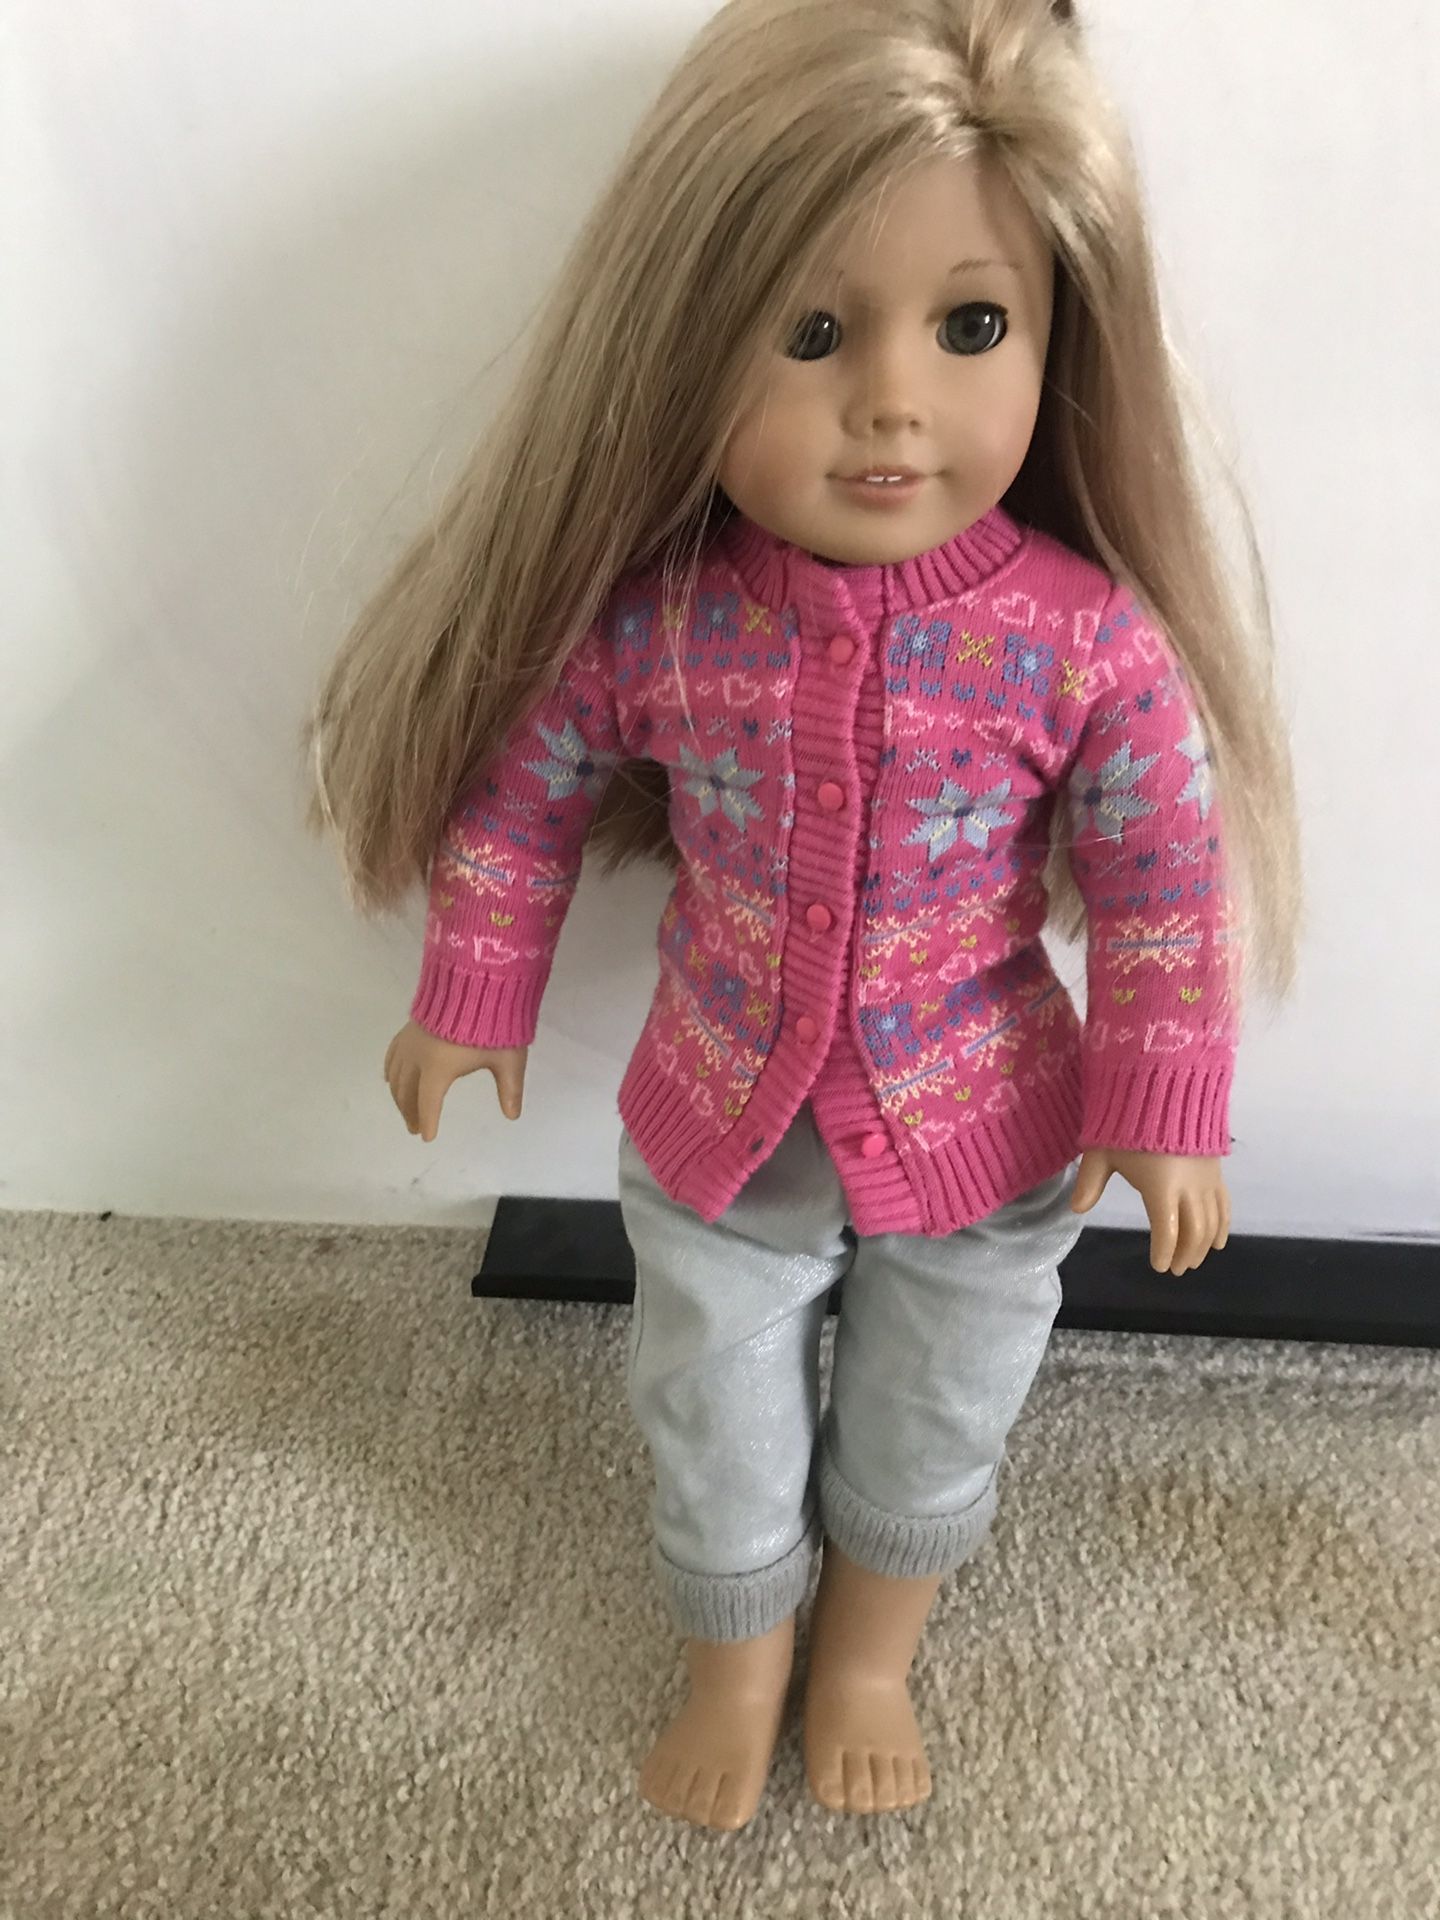 Isabelle American Girl 18” doll